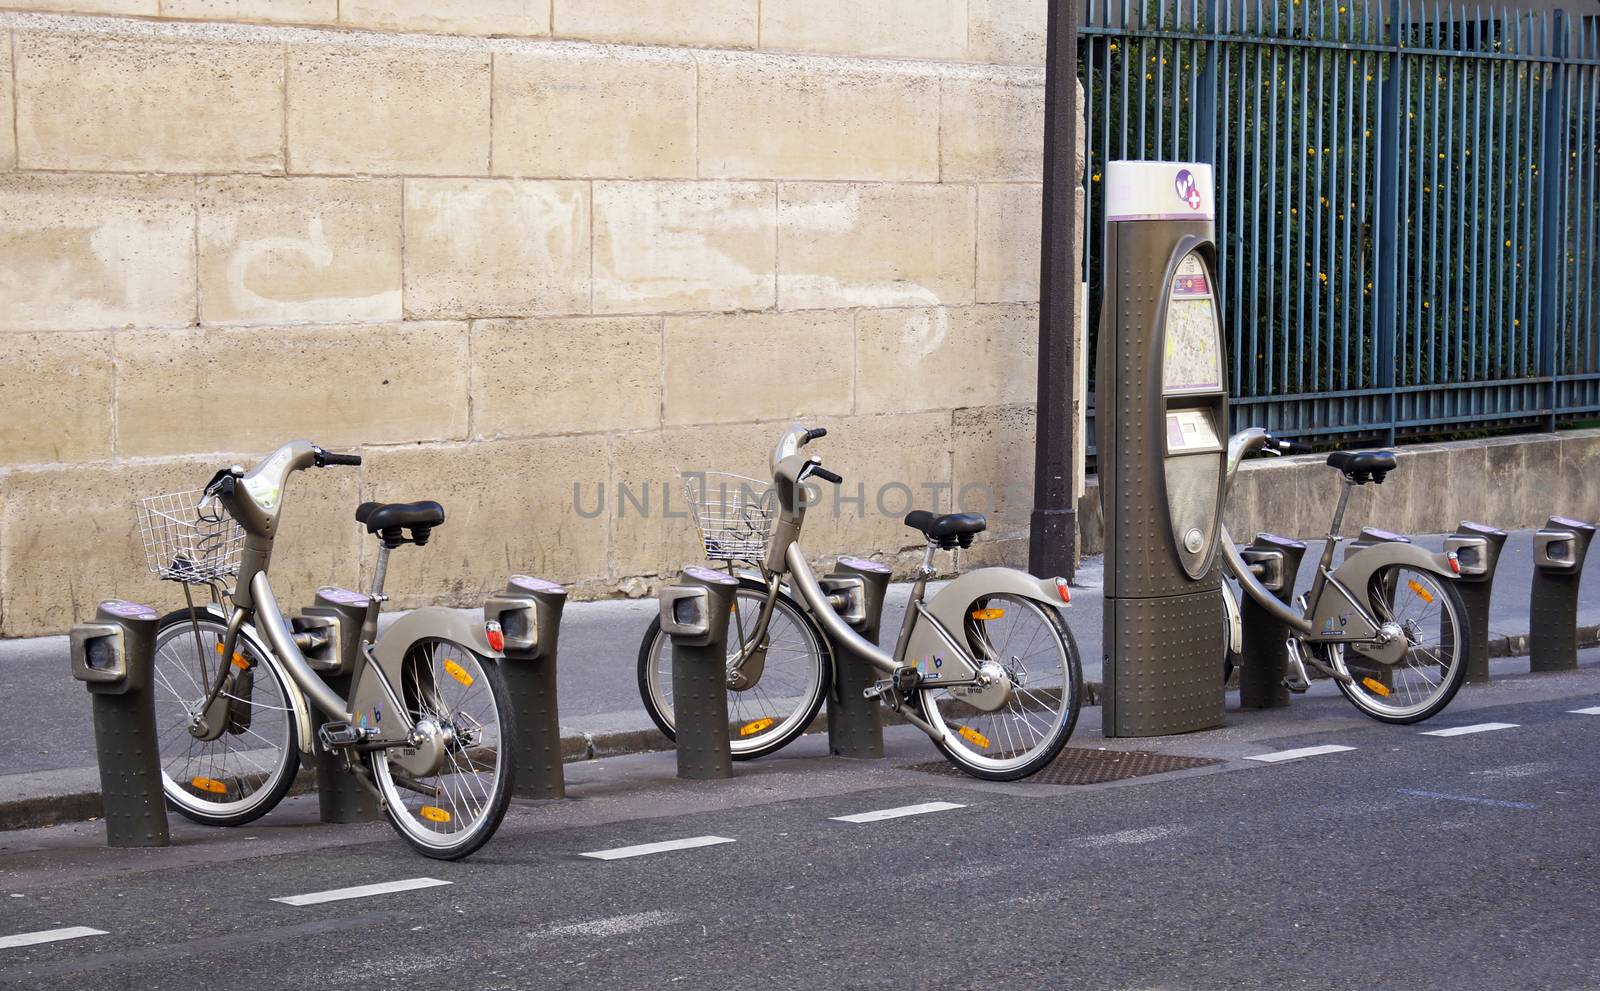 Velib bikes in Paris by magraphics